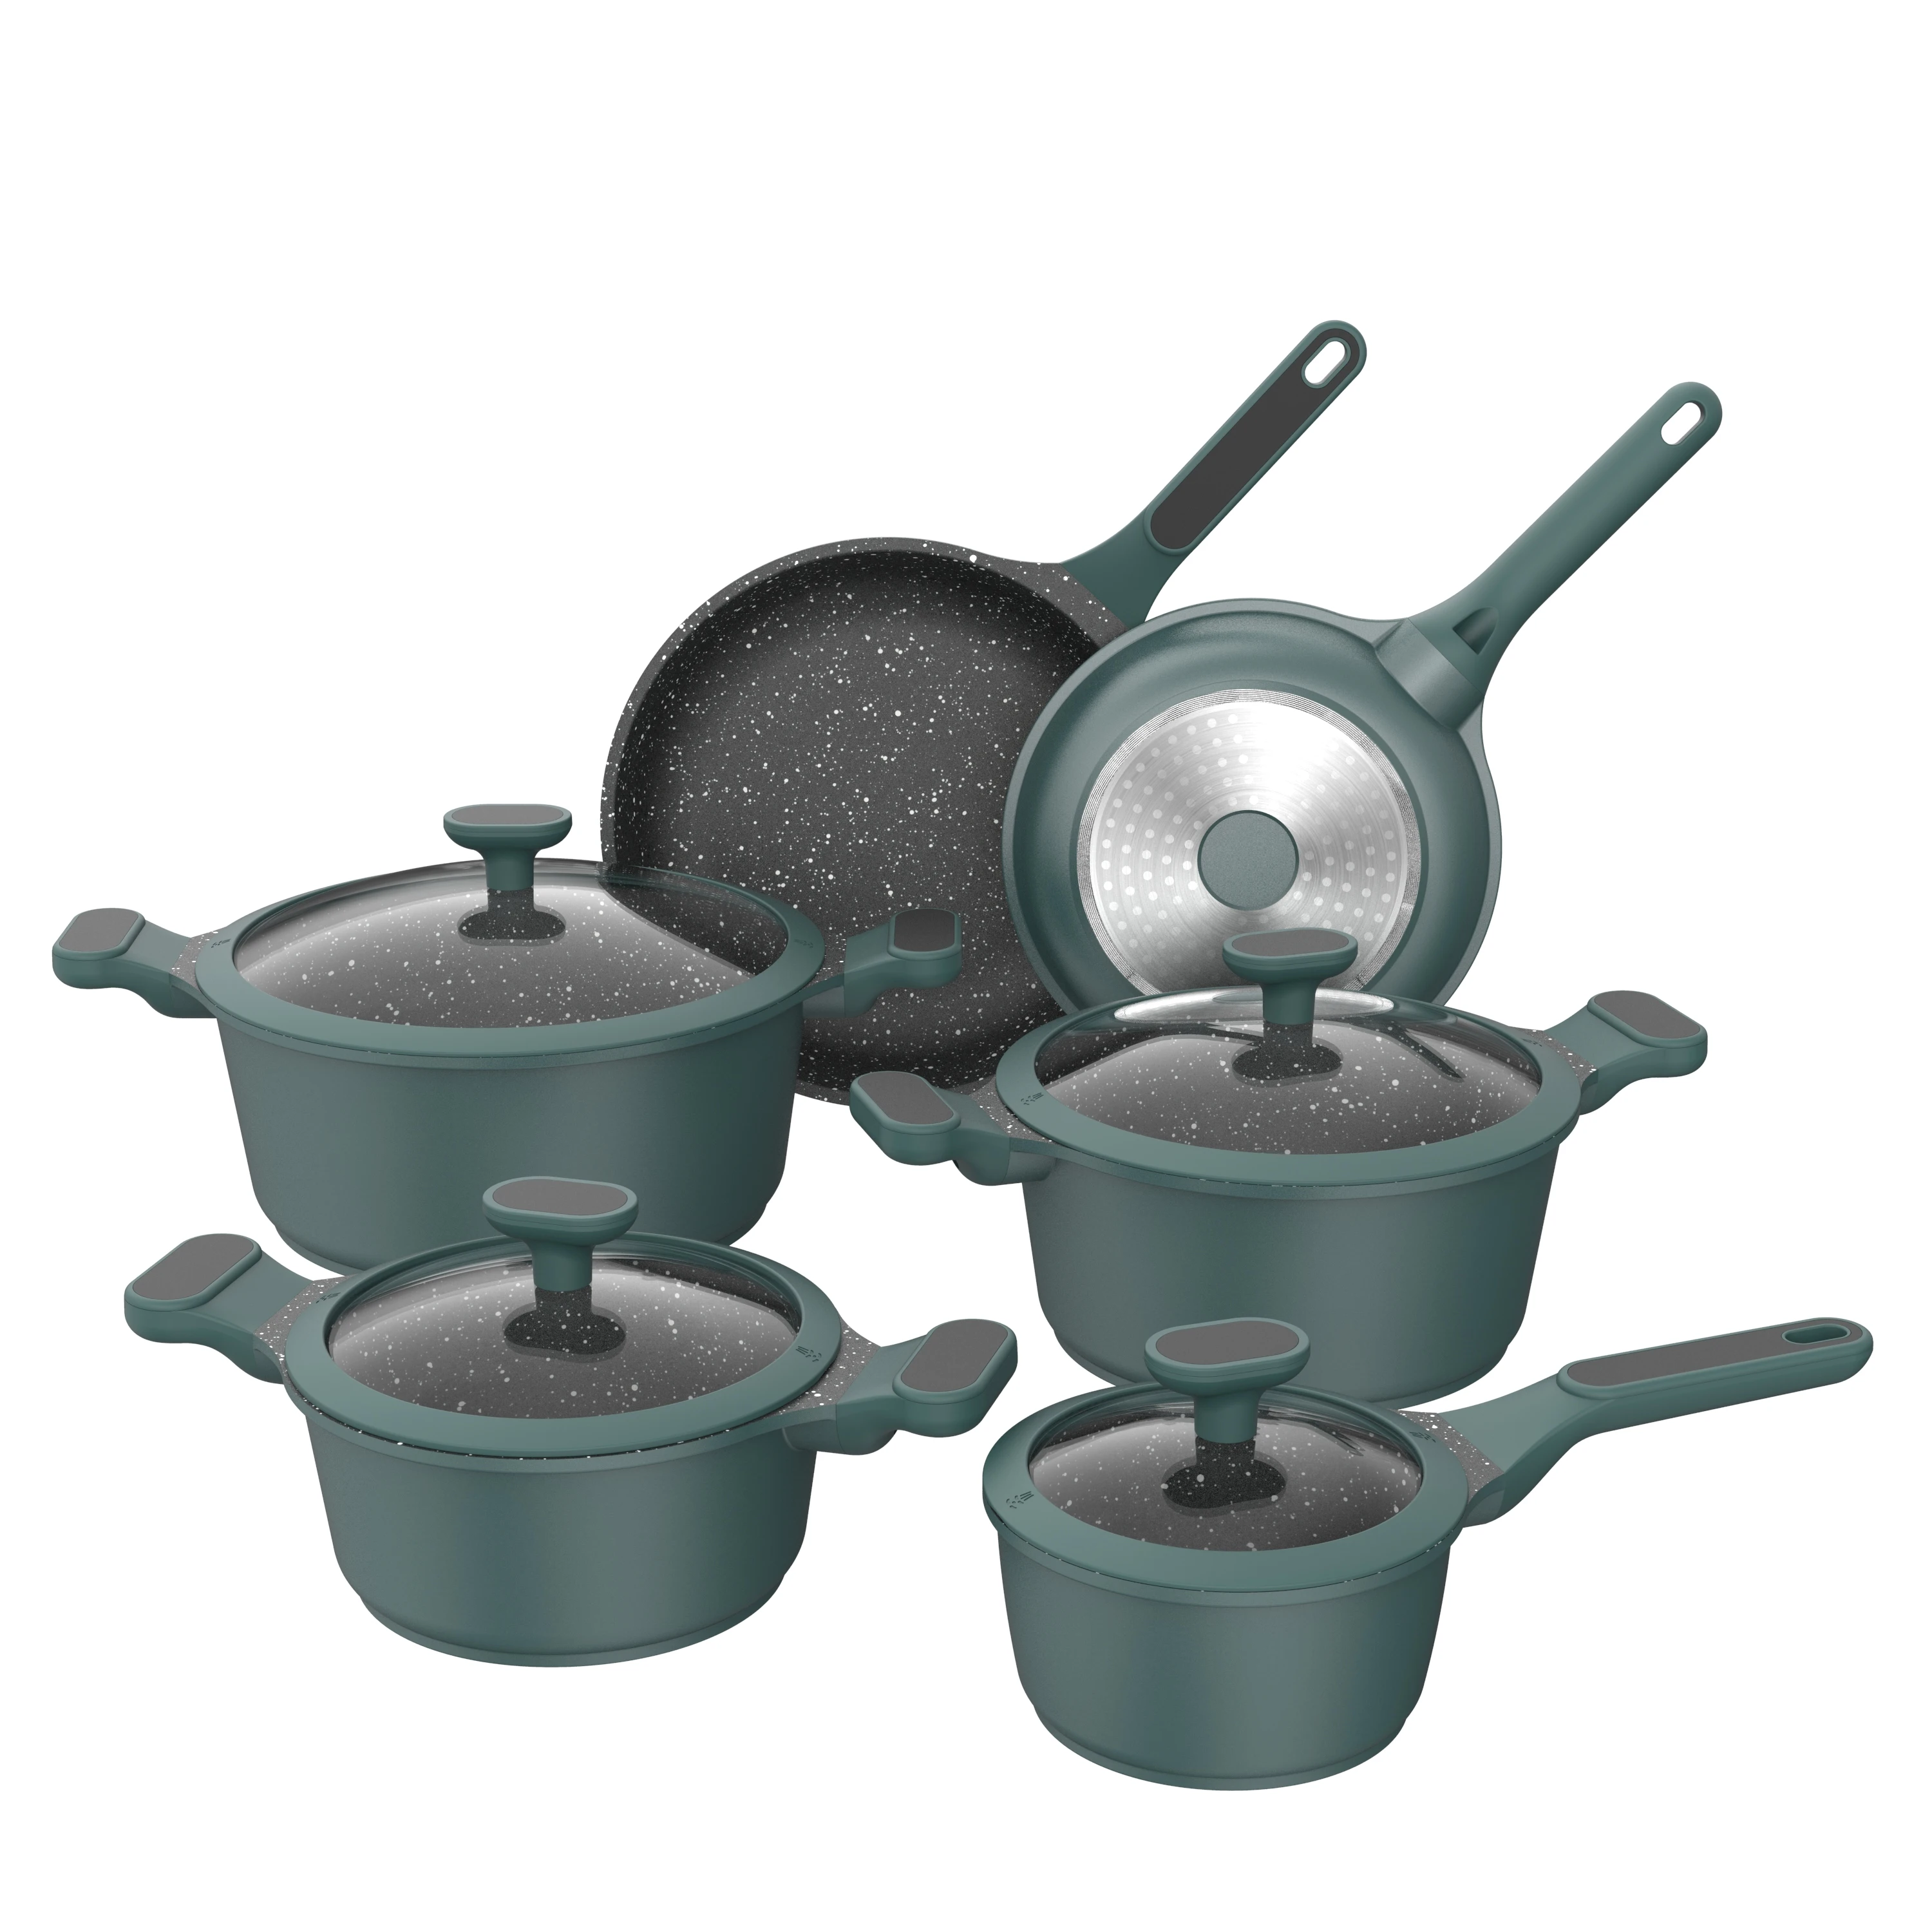 

BESCO Escalation Series 10pcs Cooking & Dining German Style Die Cast Aluminum Nonstick Cookware Sets with Glass lid Green